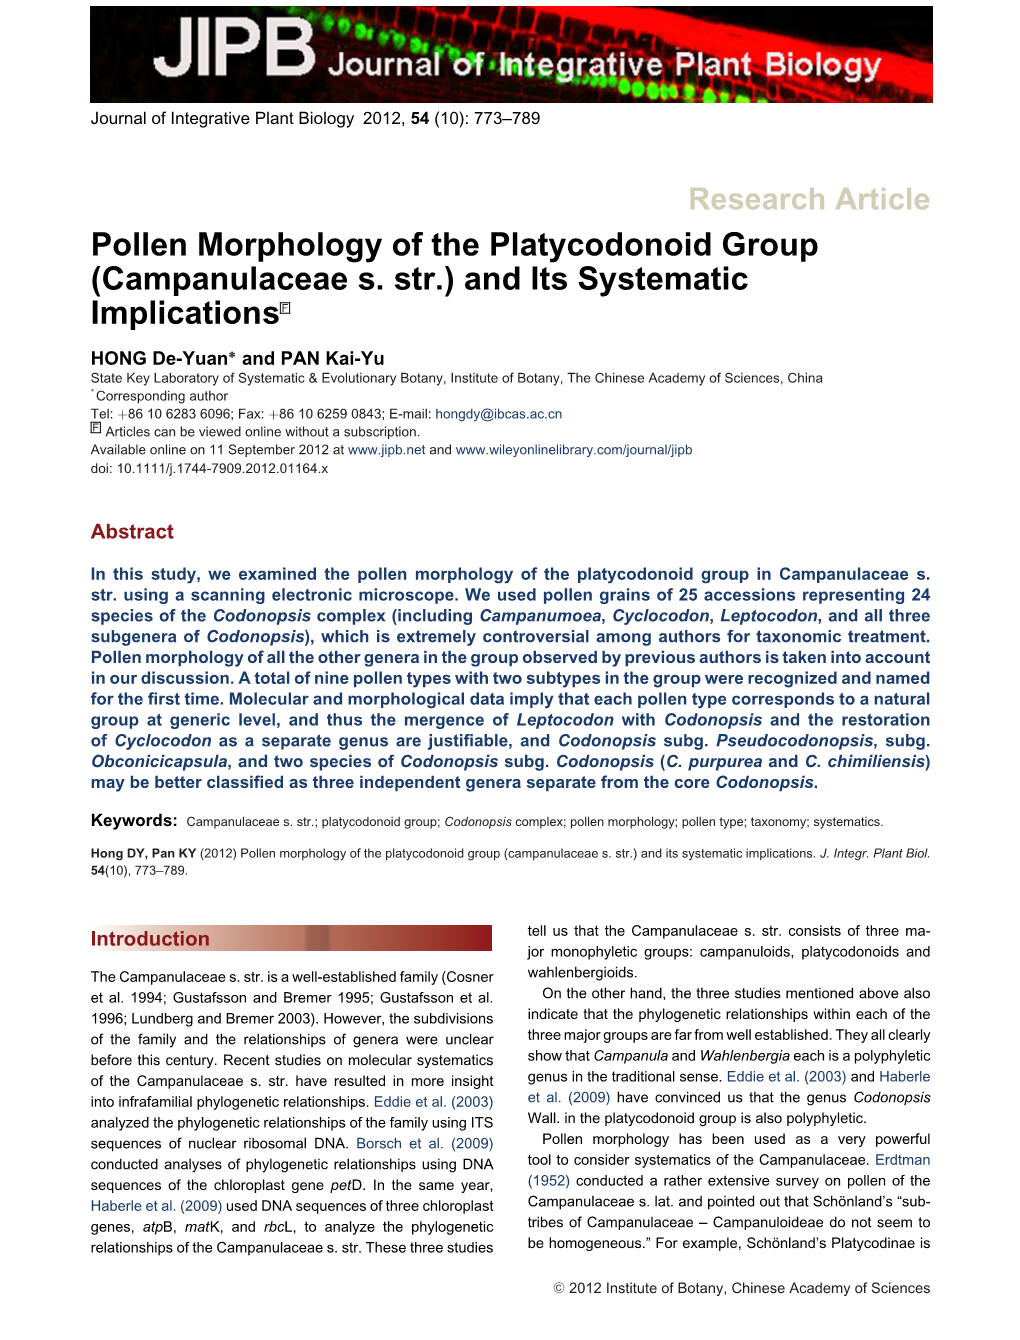 Pollen Morphology of the Platycodonoid Group (Campanulaceae S